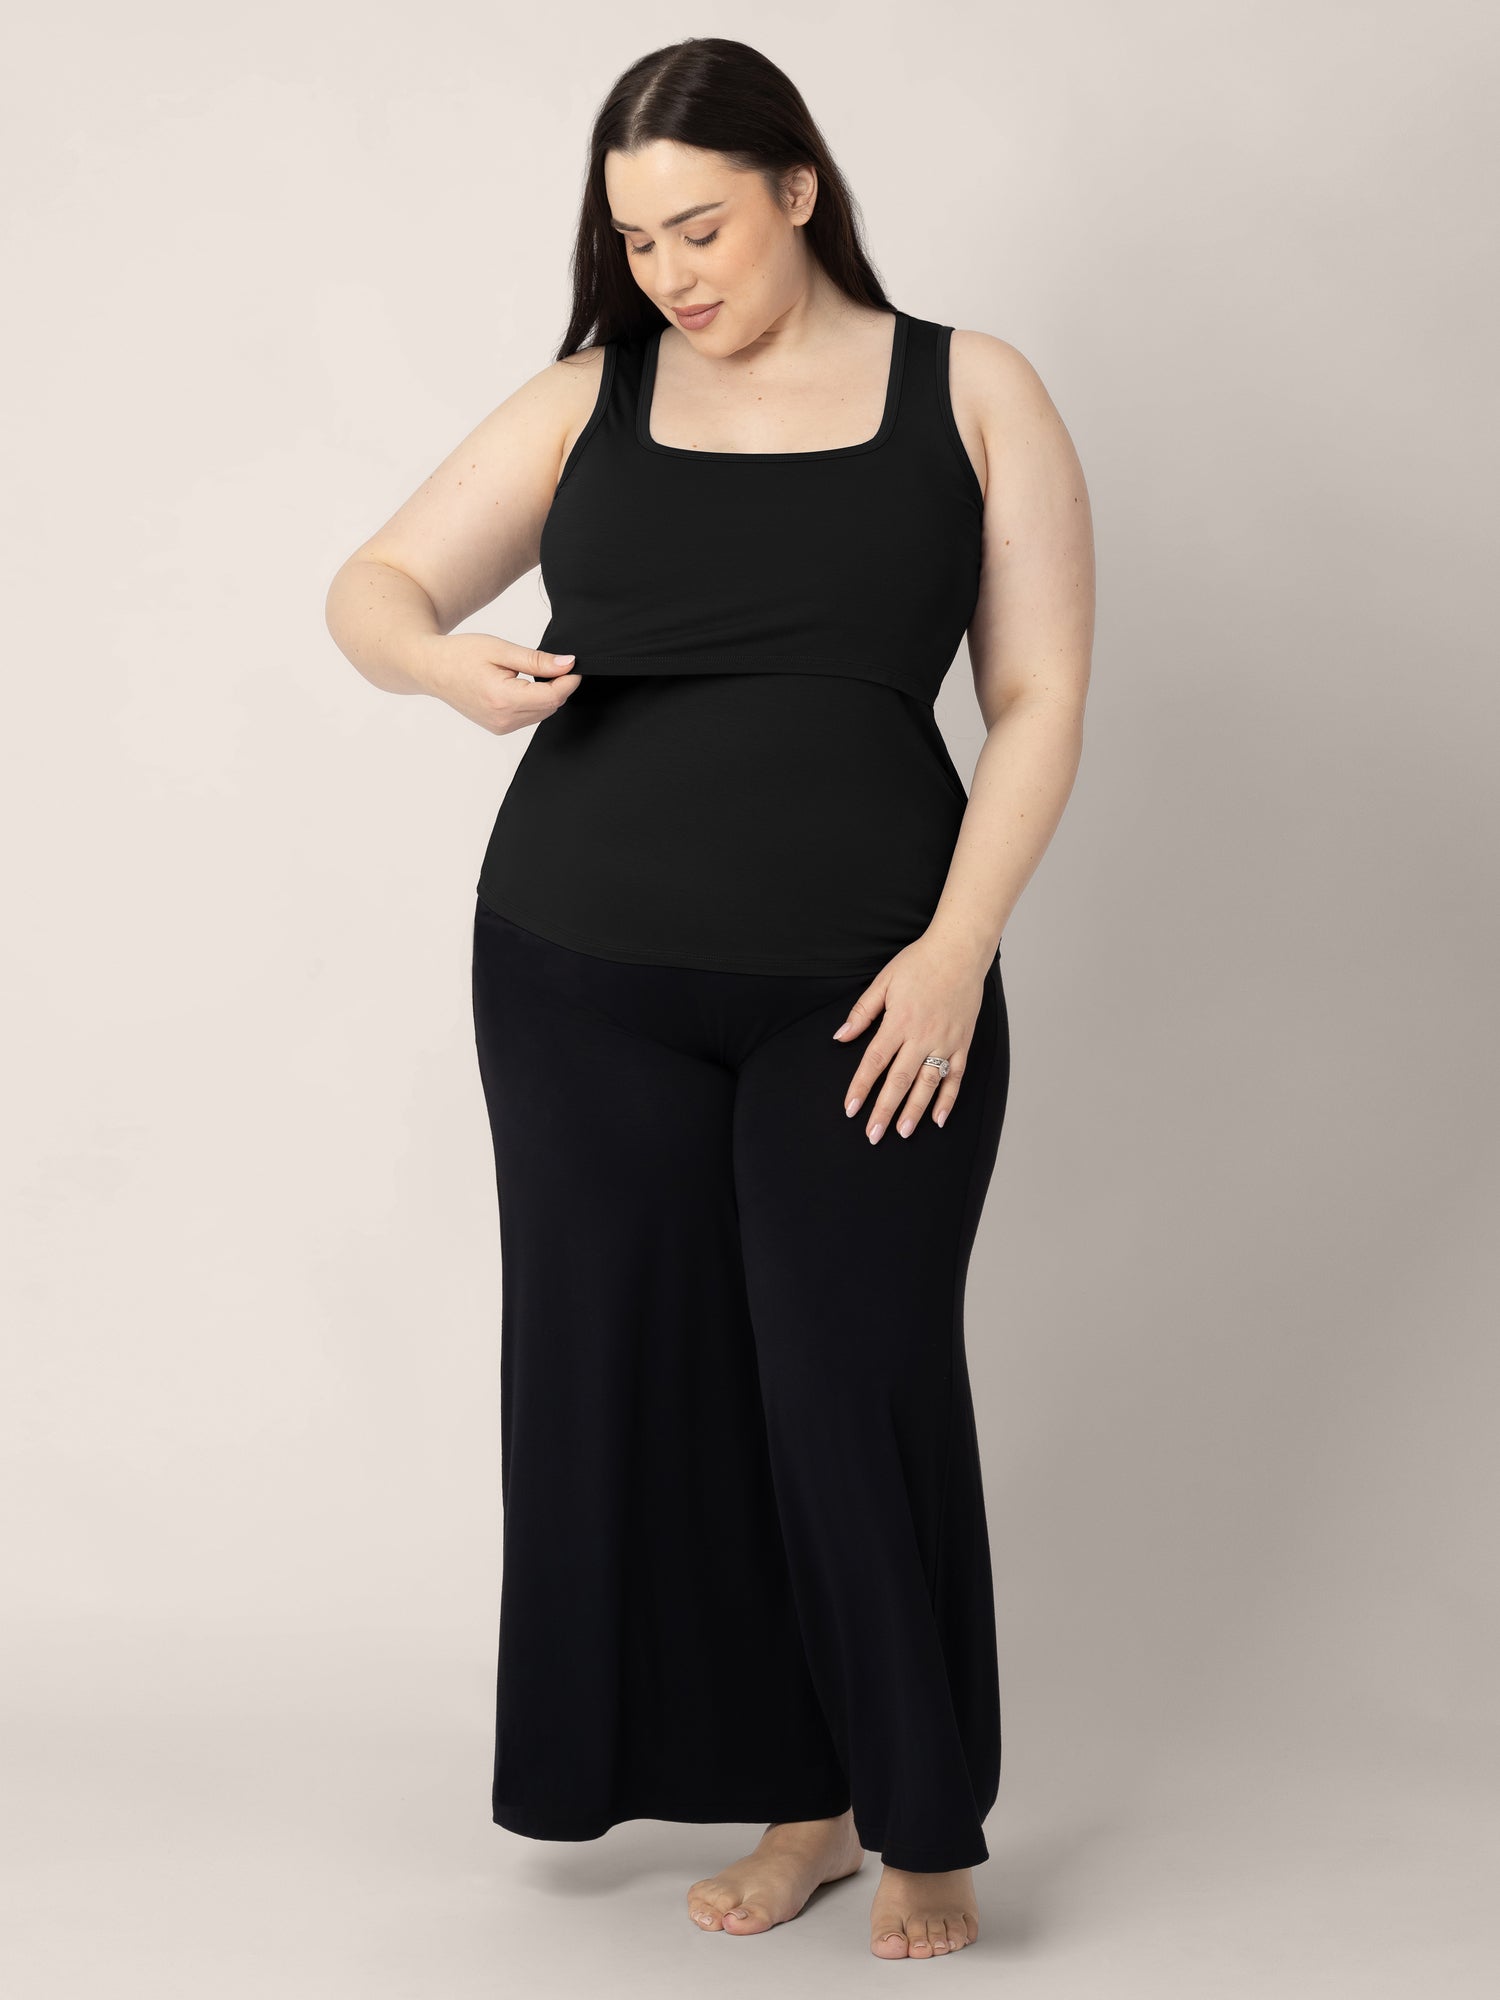 Full body view of a model wearing the Everyday Essential Nursing Tank in Black